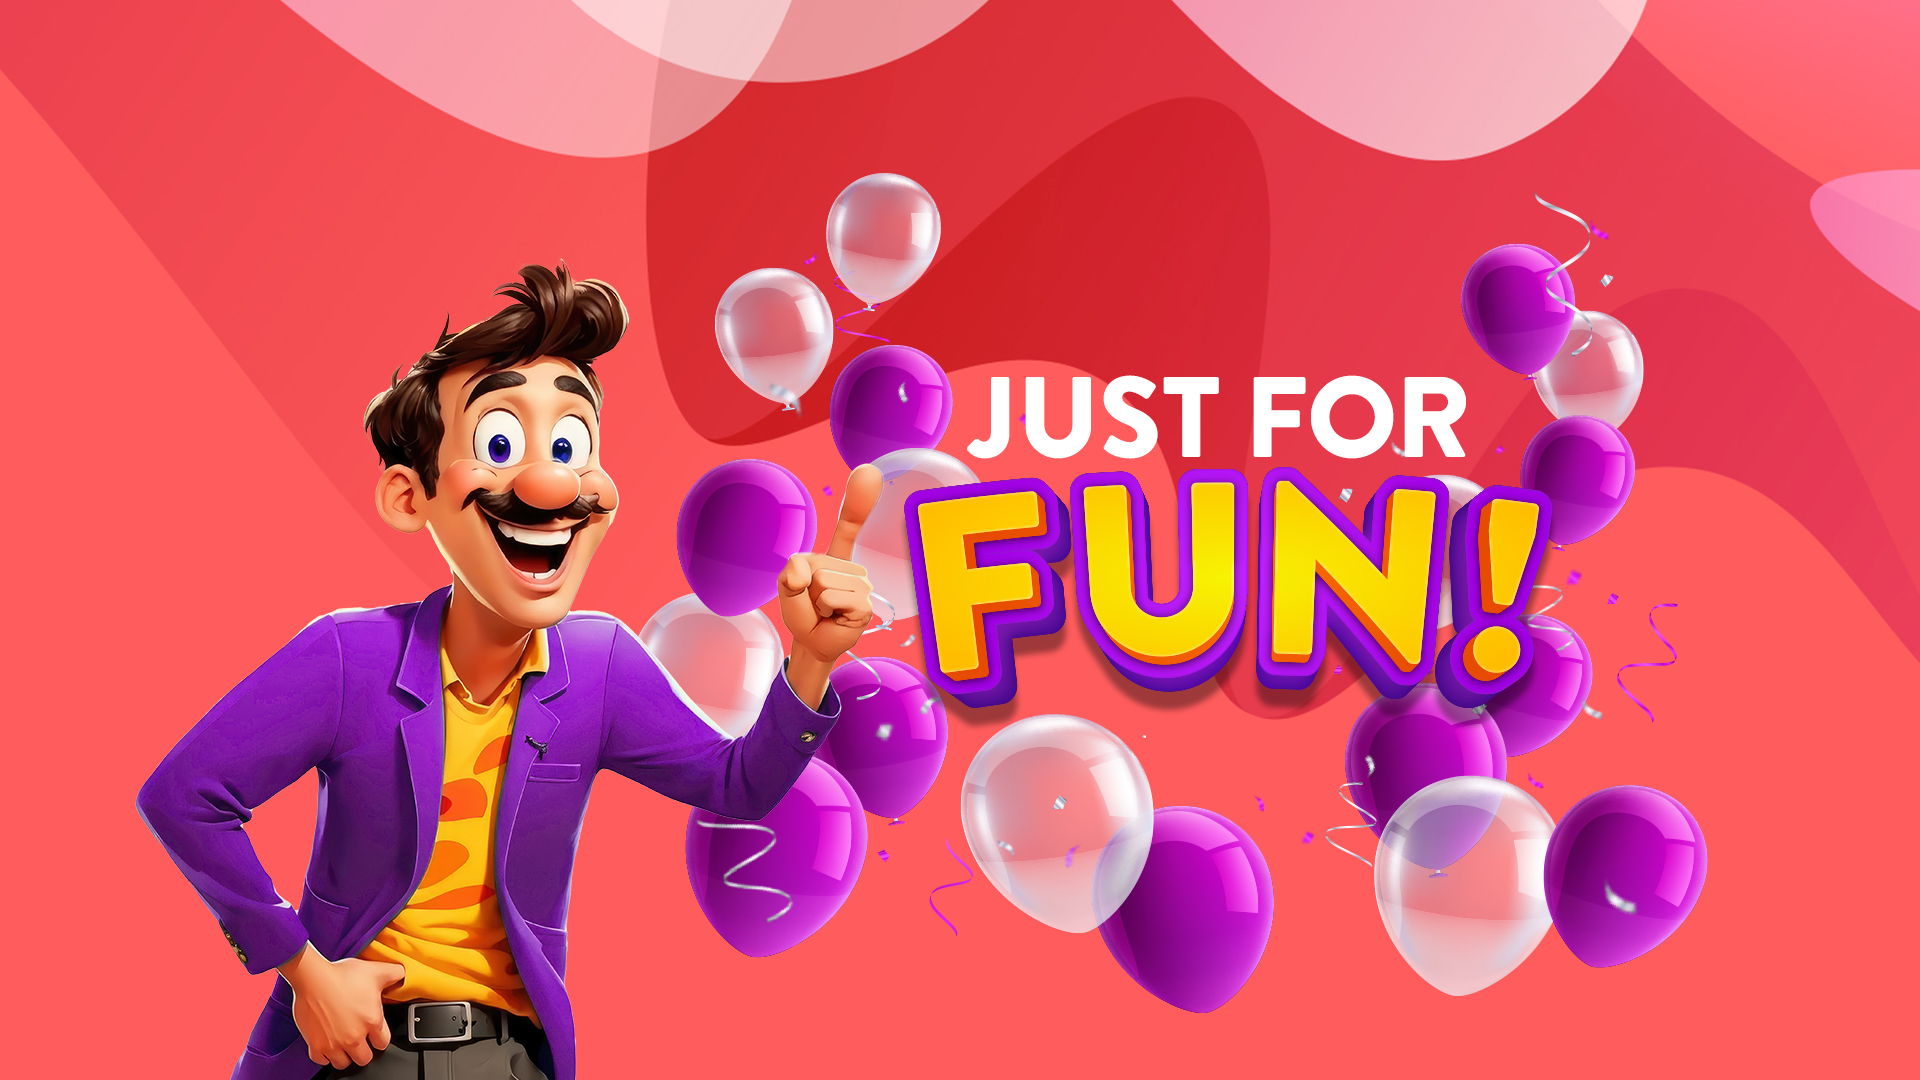 Male animated character wearing a purple blazer looking happy and pointing to the wording ‘Just For Fun!’, with purple and transparent balloons floating, on a vibrant red background.